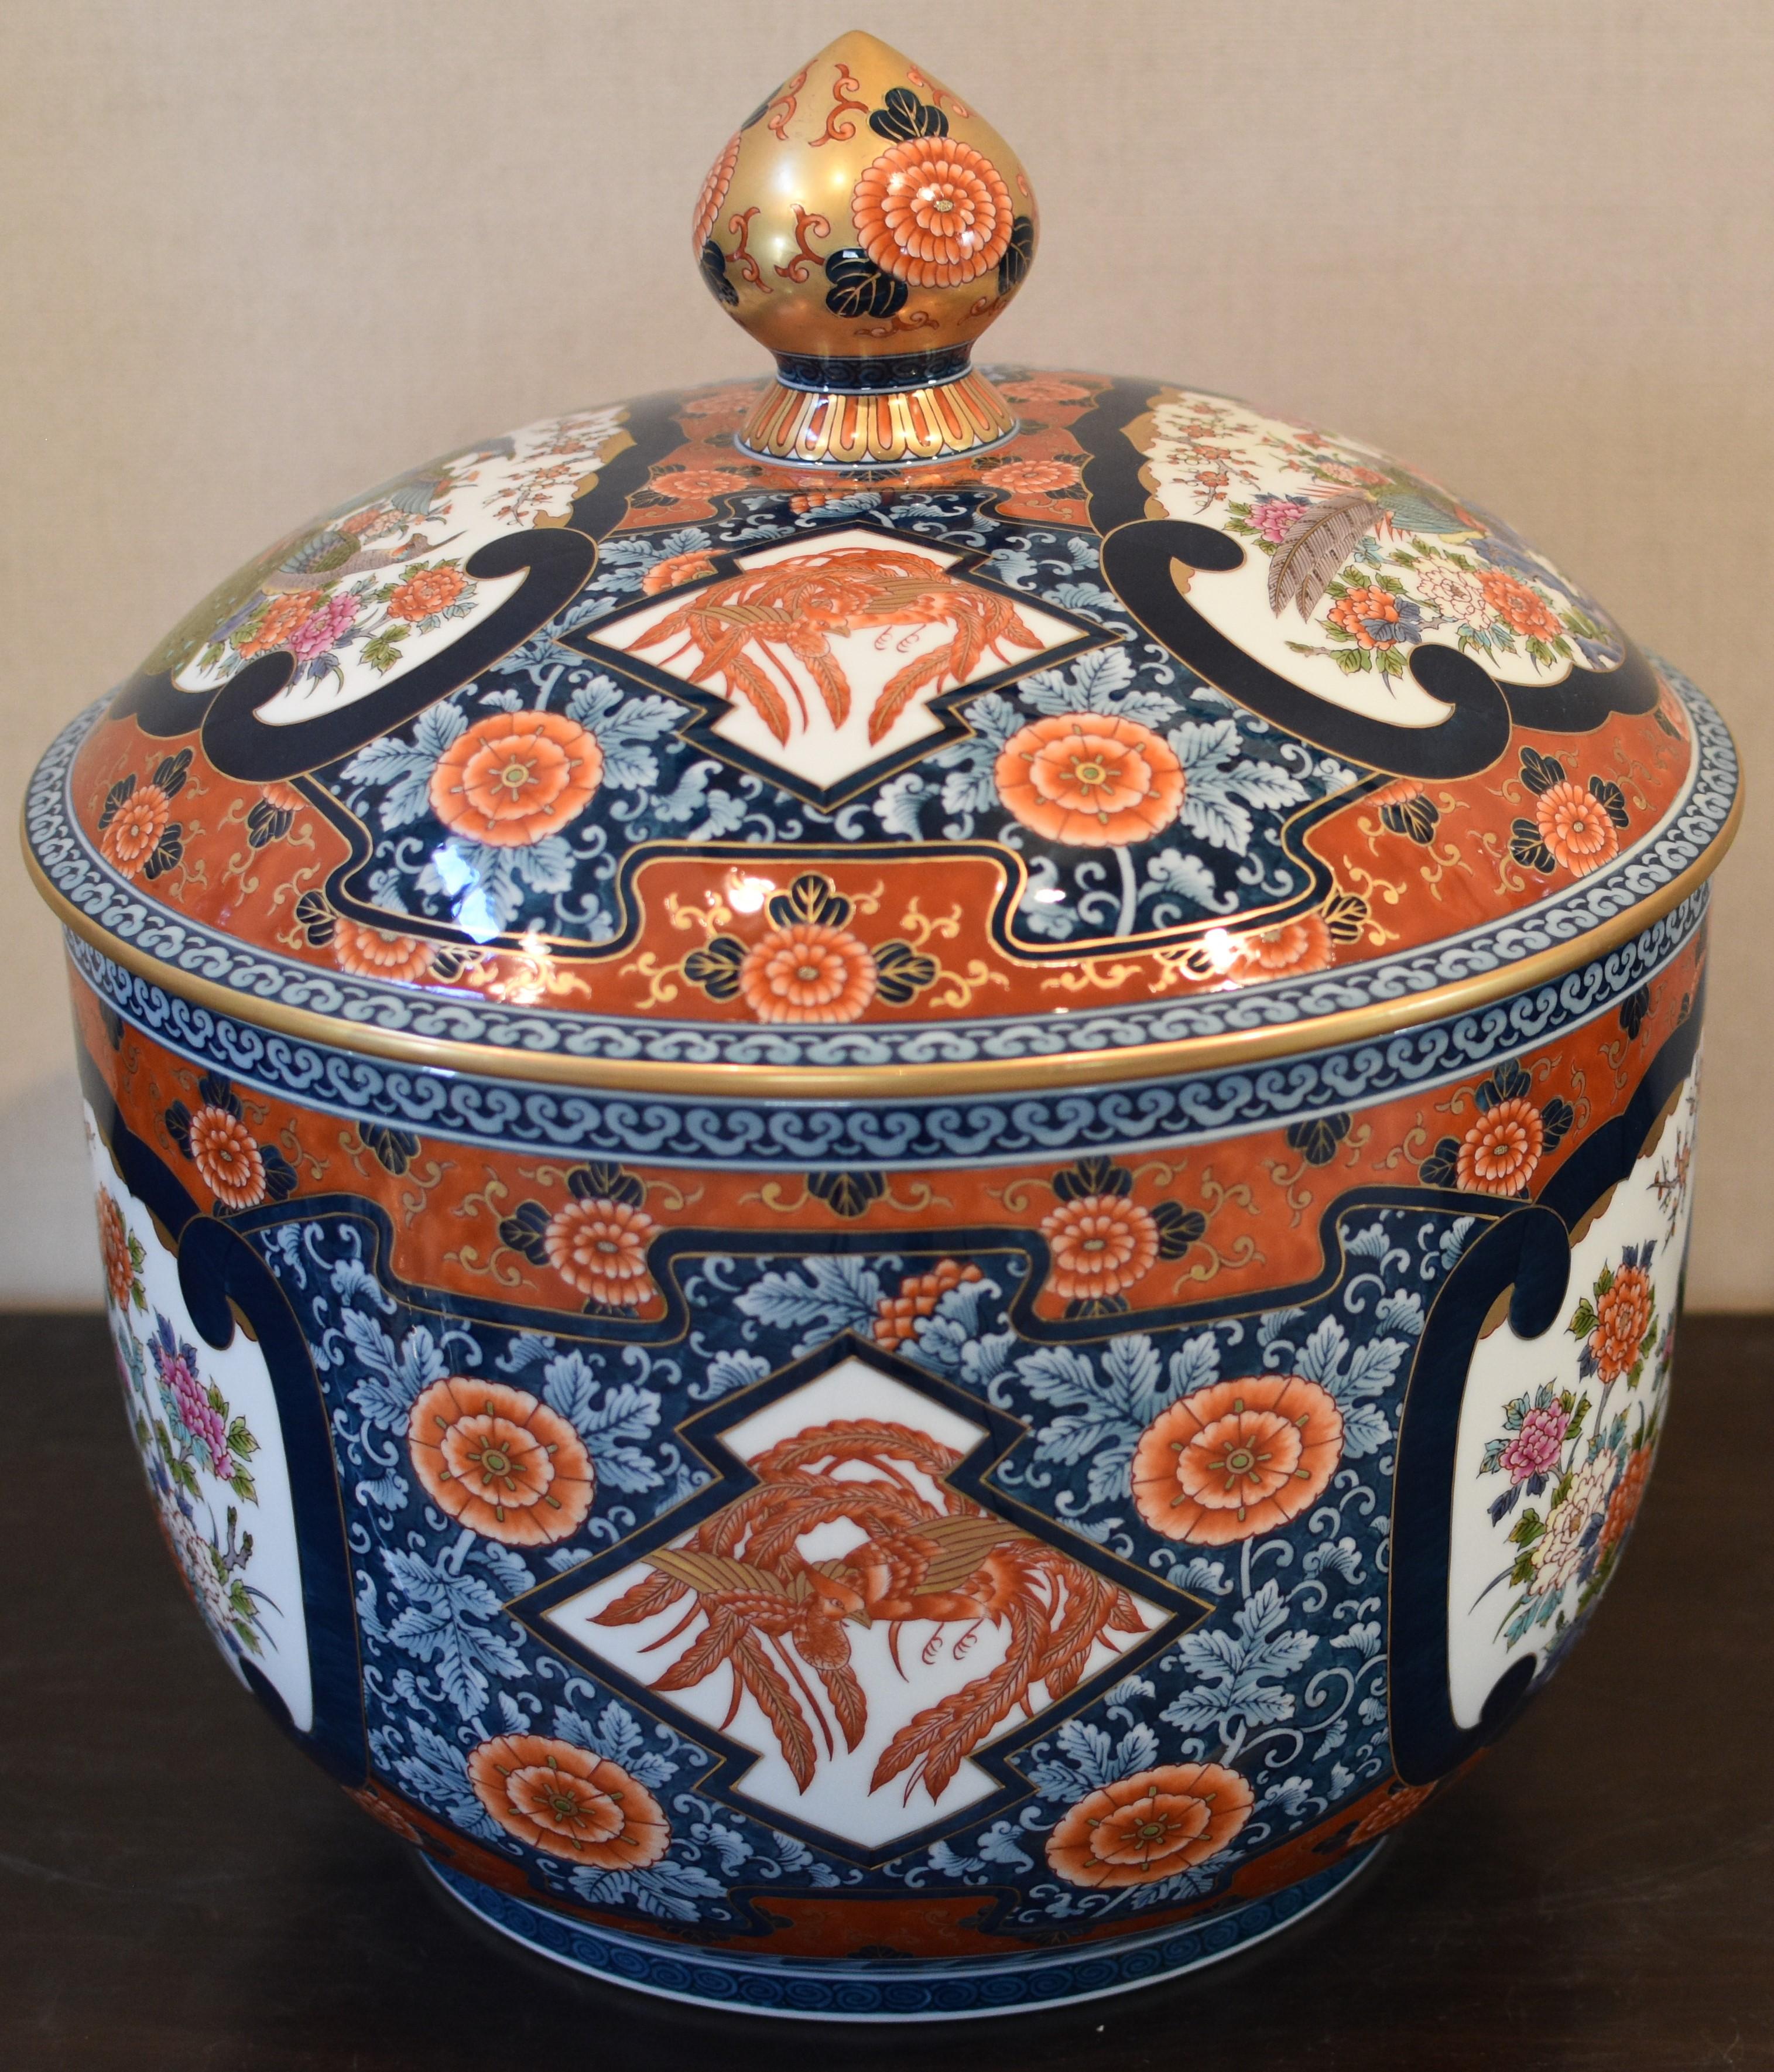 The inspiration for this massive extraordinary porcelain lidded bowl came from a rare magnificent piece this master porcelain artist created in the past that found its home in a royal palace. This is a large outstanding and unique contemporary